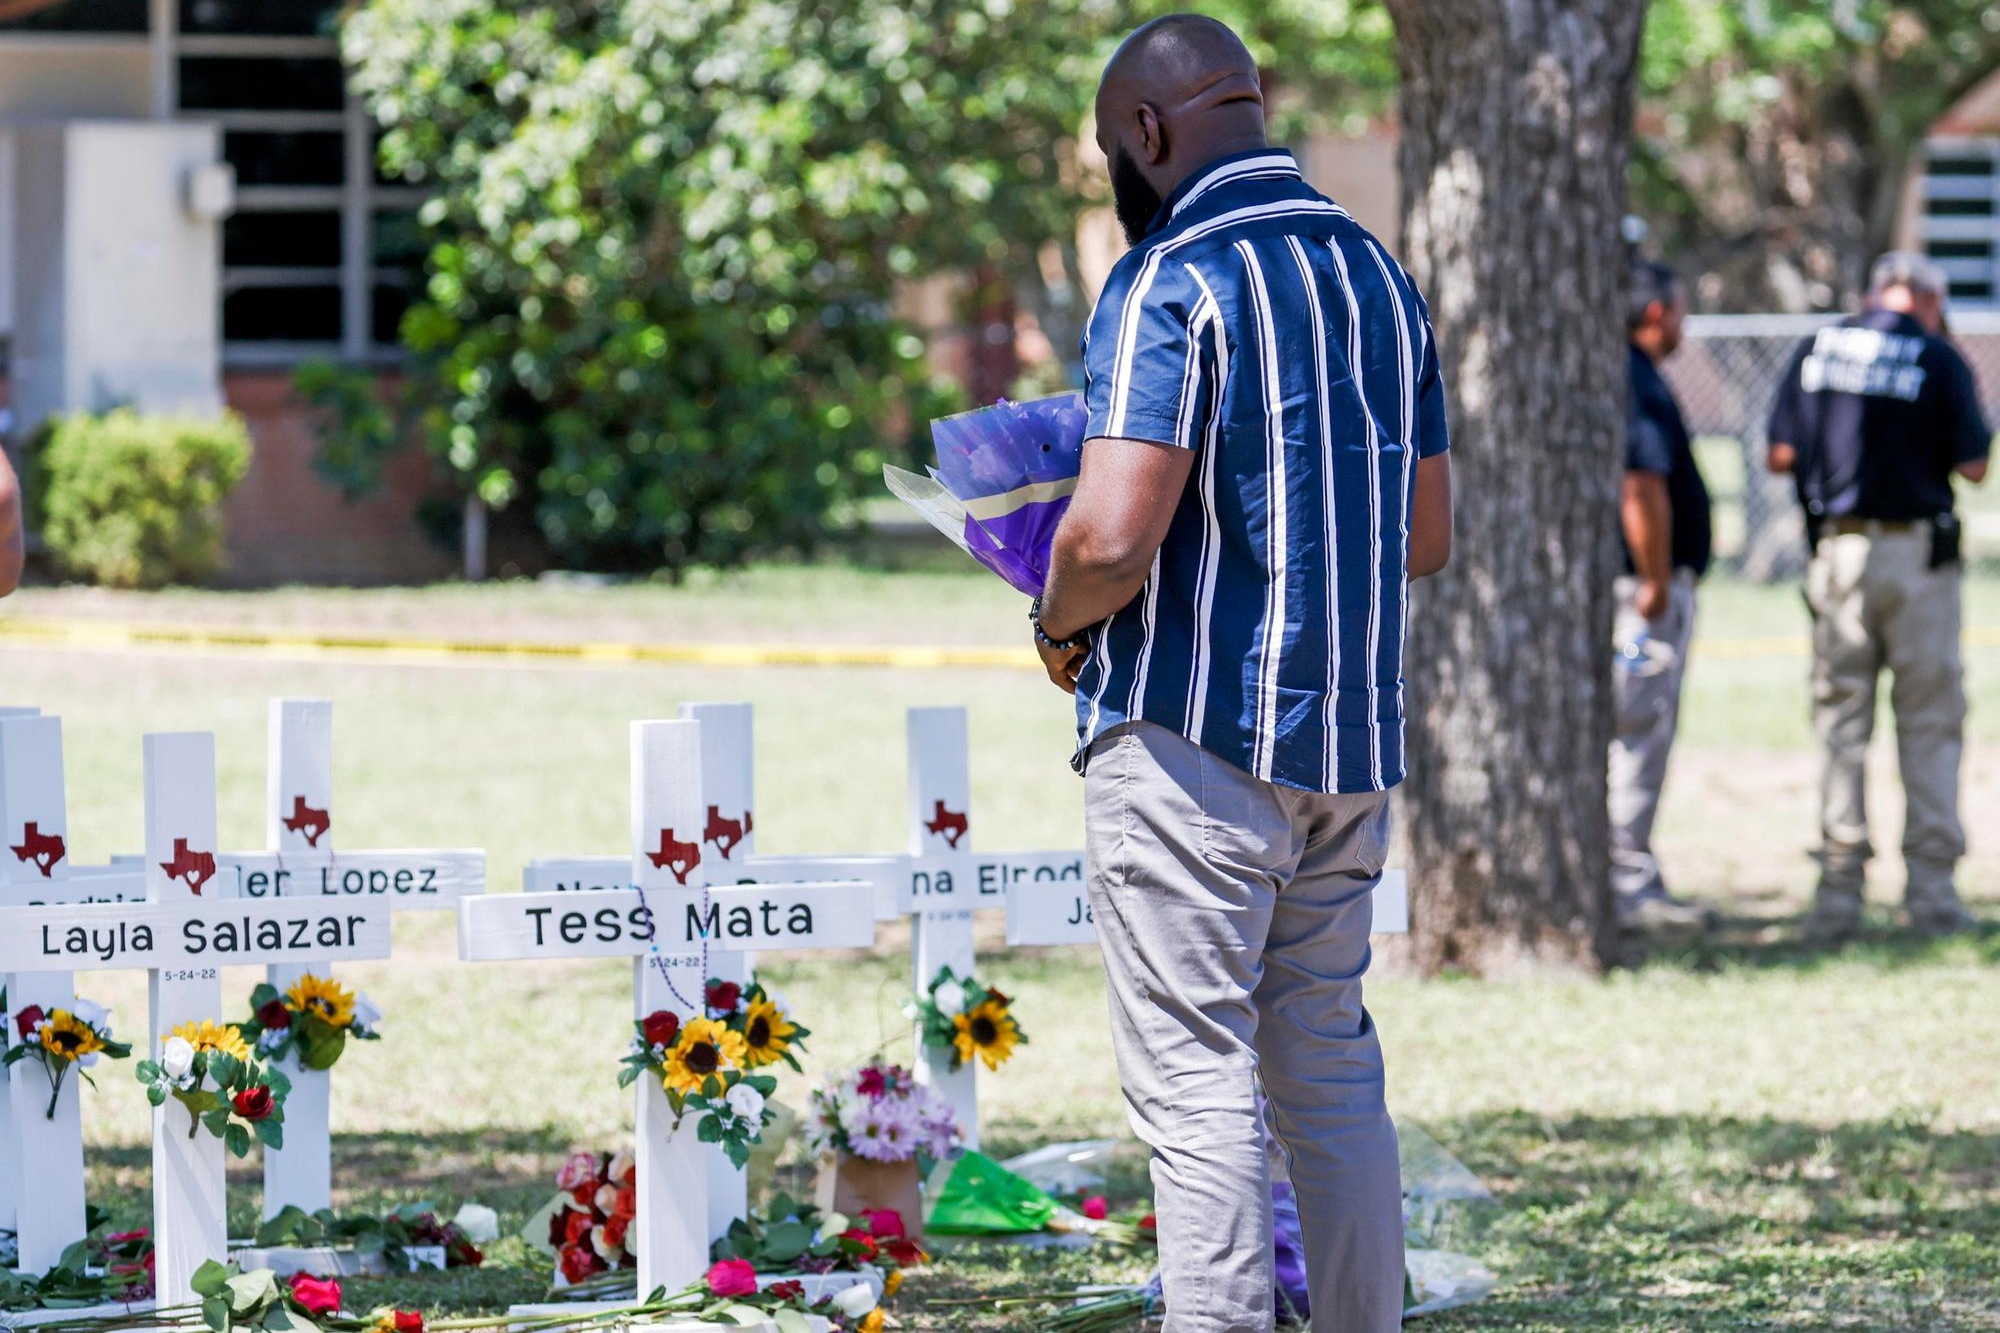 epa09978090 A man holds flowers as he views crosses bearing the names of victims following a mass shooting at the Robb Elementary School in Uvalde, Texas, USA, 26 May 2022. According to Texas officials, at least 19 children and two adults were killed in the shooting on 24 May. The eighteen-year-old gunman was killed by responding officers. EPA/TANNEN MAURY